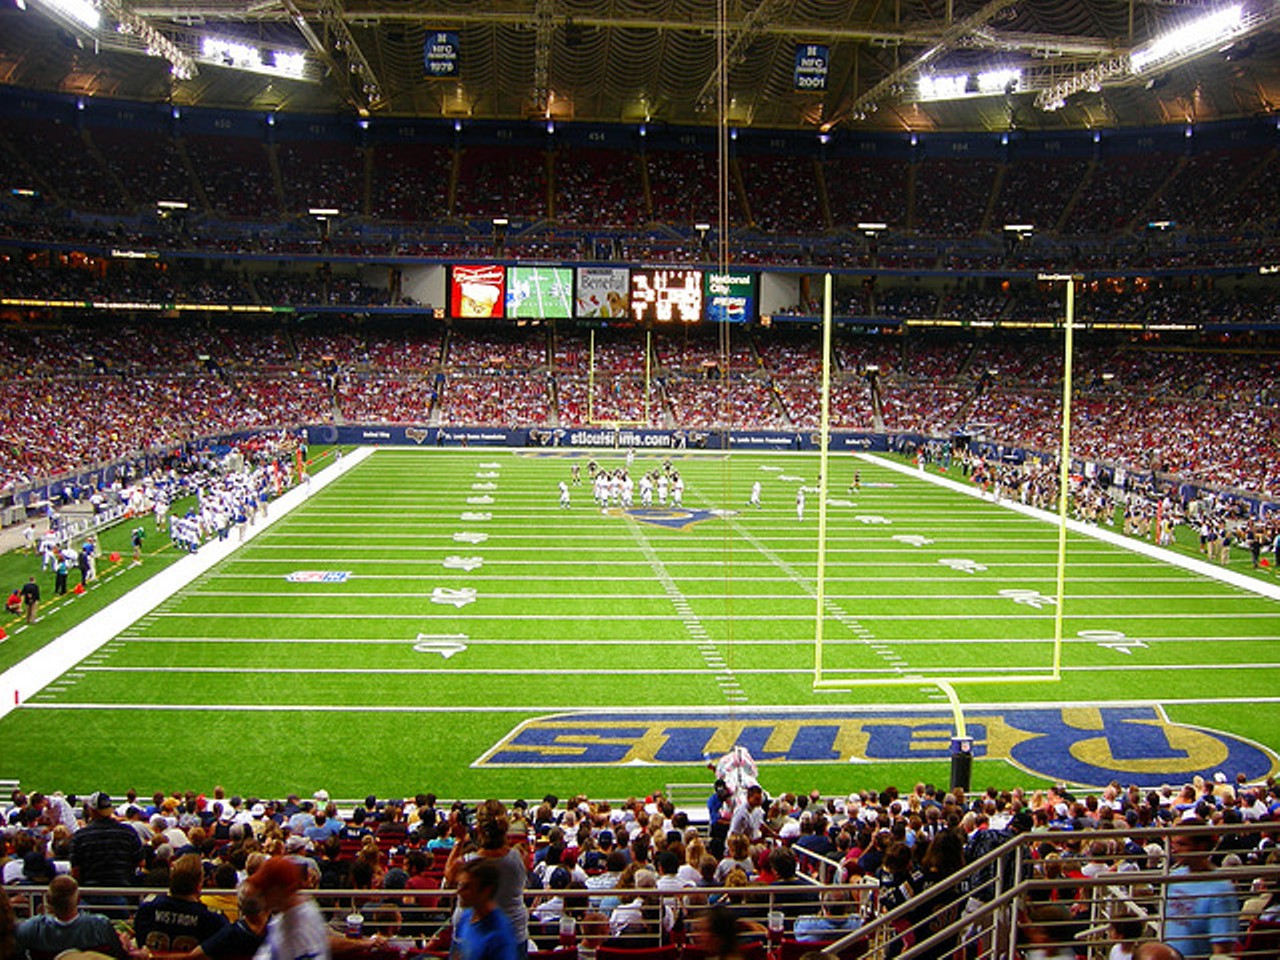 We came in at No. 20 for football. (Wallet Hub) Photo courtesy of Flickr/Tojosan